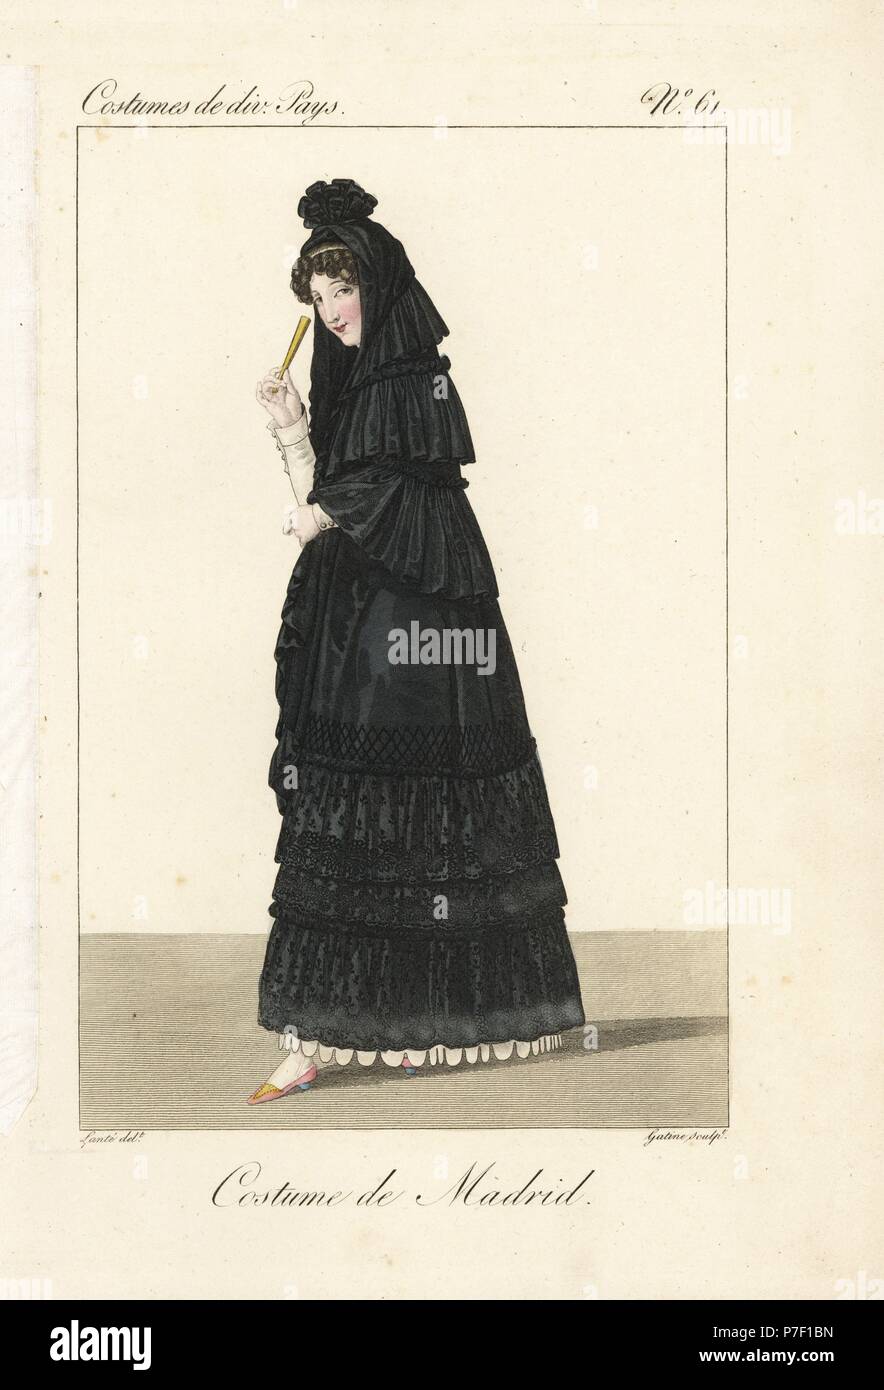 Woman of Madrid, Spain, 19th century. She wears the traditional black mantilla veil and basquina dress over a white petticoat and carries a fan. Handcoloured copperplate engraving by Georges Jacques Gatine after an illustration by Louis Marie Lante from Costumes of Various Countries, Costumes de Divers Pays, Paris, 1827. Stock Photo